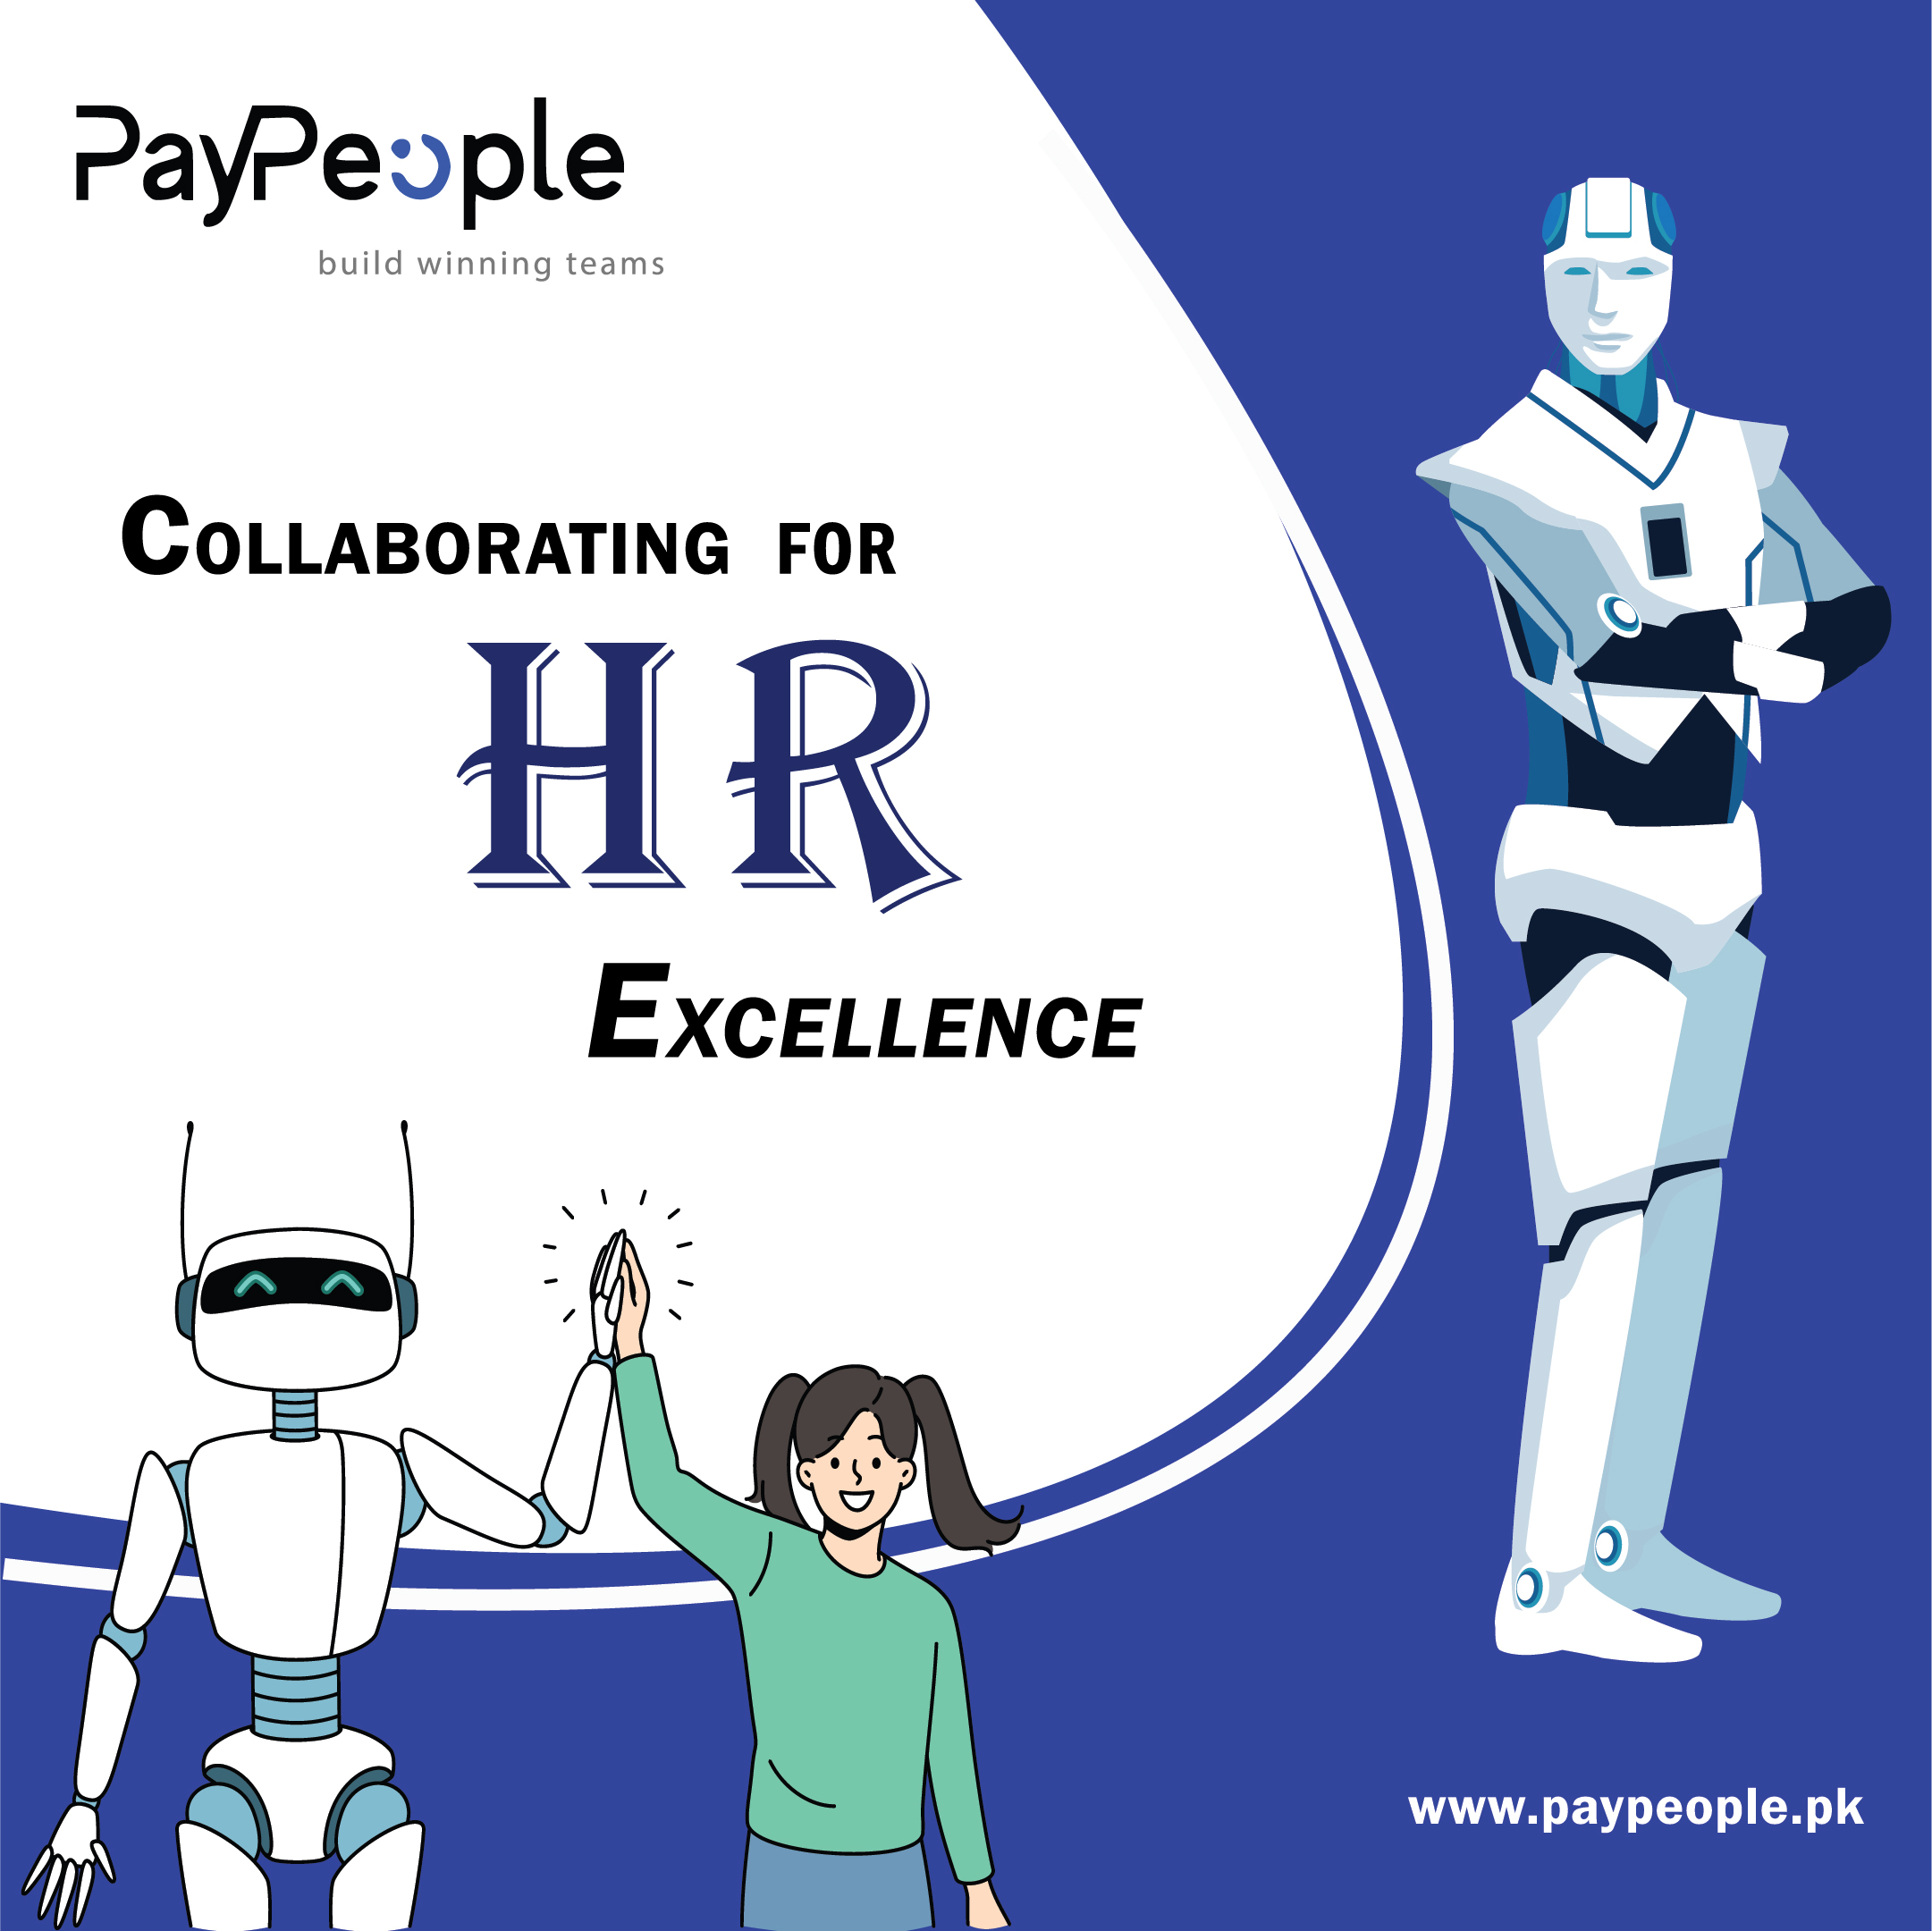 Is HR Software compatible with existing business applications?